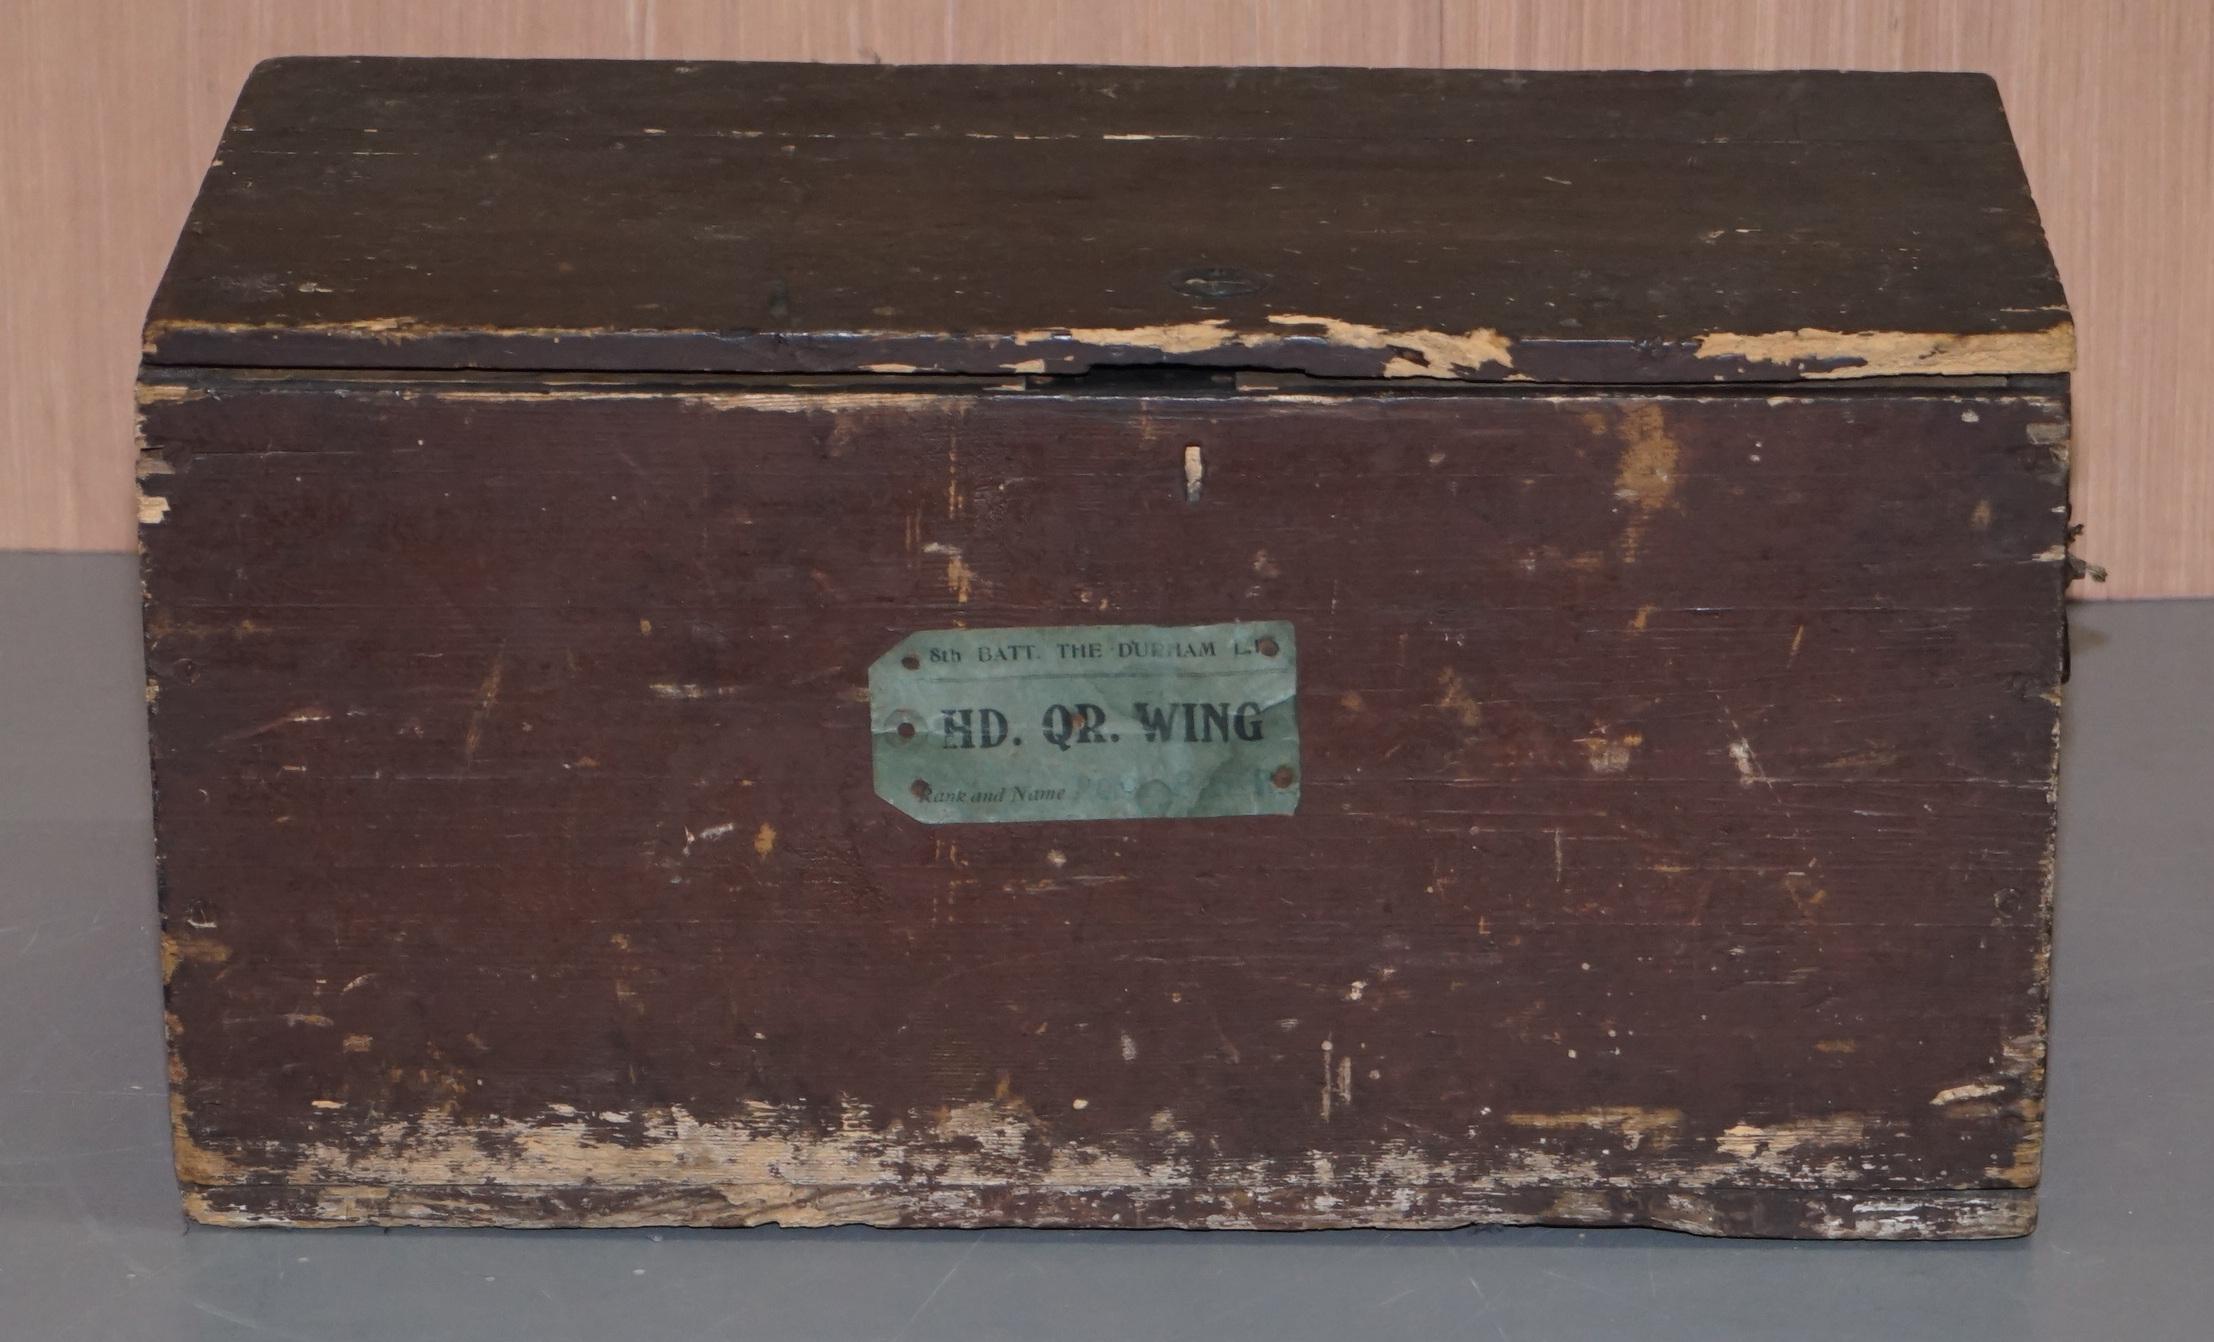 We are delighted to this stunning small Military Campaign Chest with the original label that states 8th Battalion The Durham HD GR wing

The label has the privates name on which is very faded, this is a Campaign used WW2 piece

The condition is